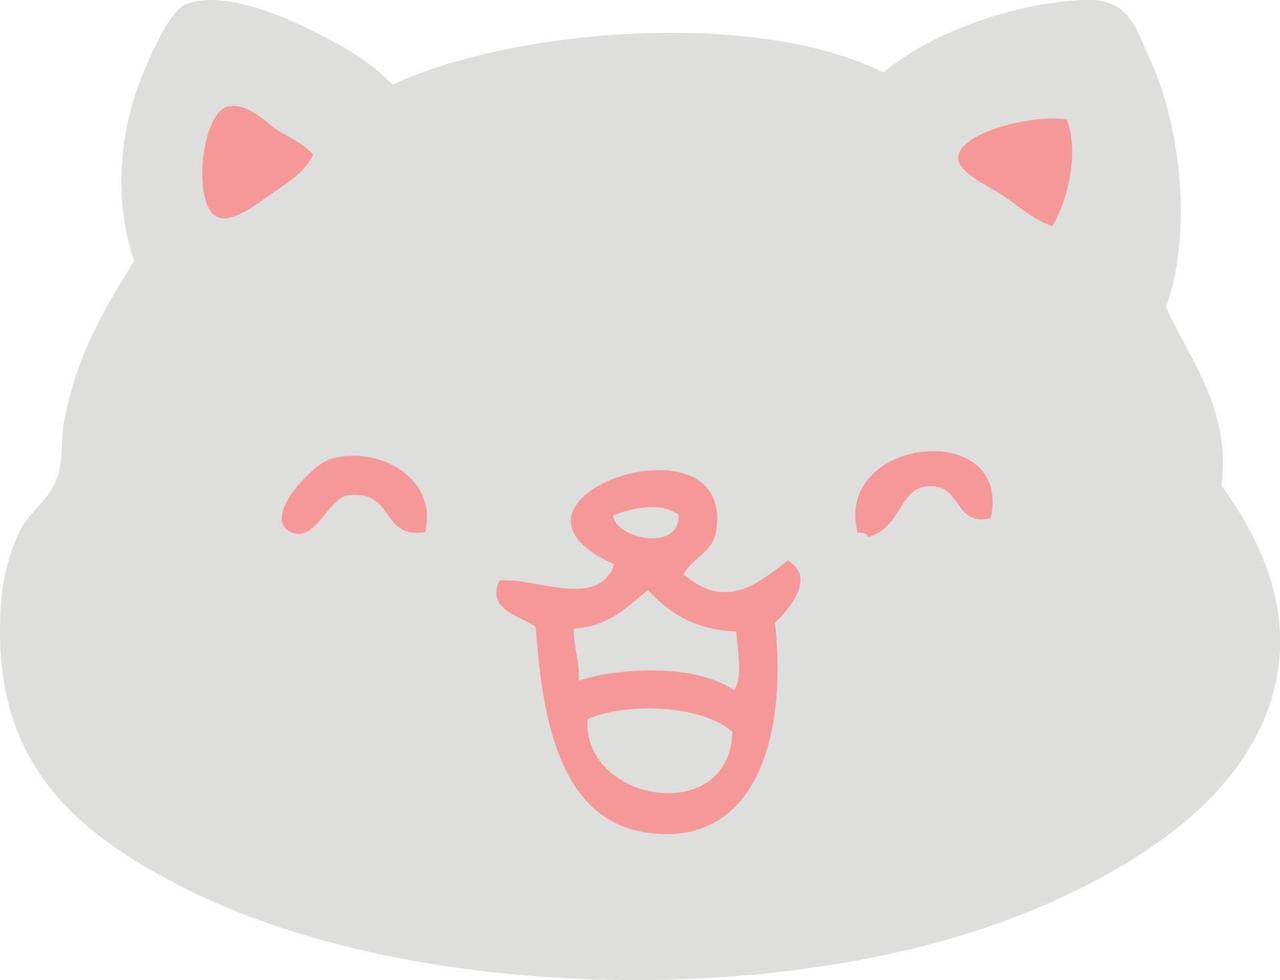 cat face sticking out tongue vector